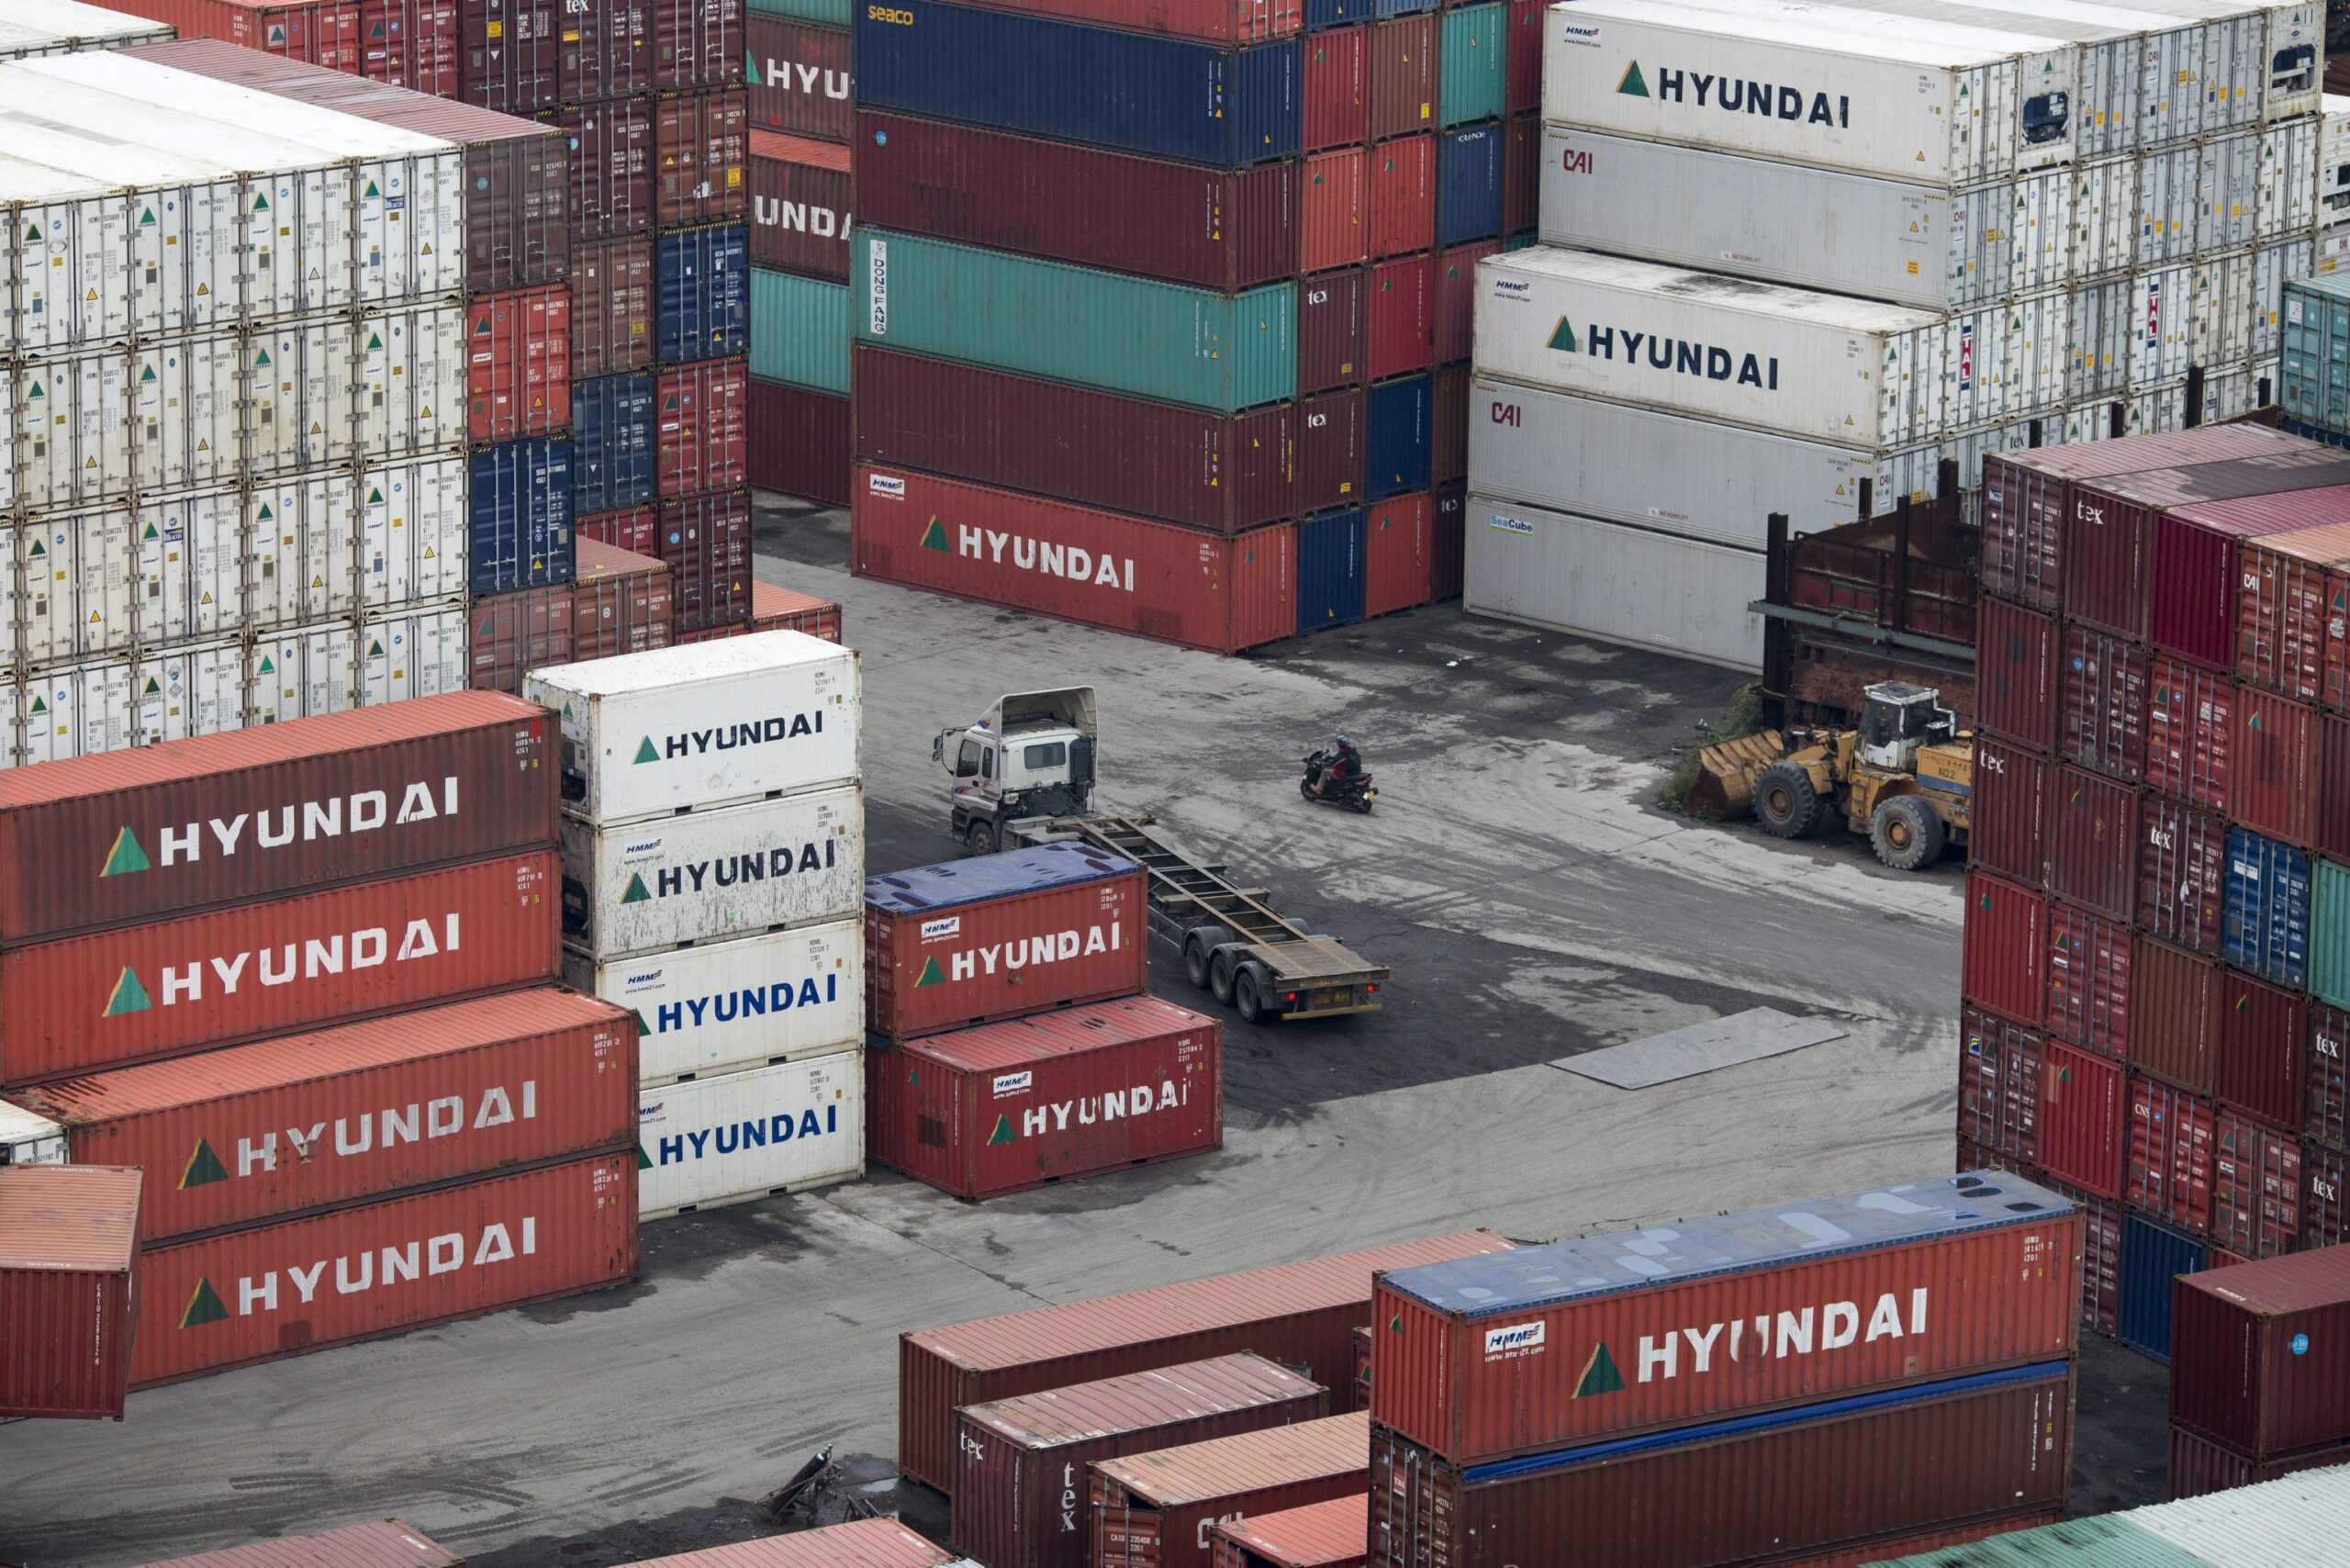 epa05167637 Shipping containers are stacked in Kwai Tsing container port in Hong Kong, China, 18 February 2016. The port ranked 4th in volume in 2014 but has now slipped to 5th place as port traffic has fallen over the past 18 months. Preference now seems to be given to the newer facilities in mainland China, such as Shenzhen and Shanghai ports, which can accommodate the draft requirement of new ultra-large container ships.  EPA/JEROME FAVRE